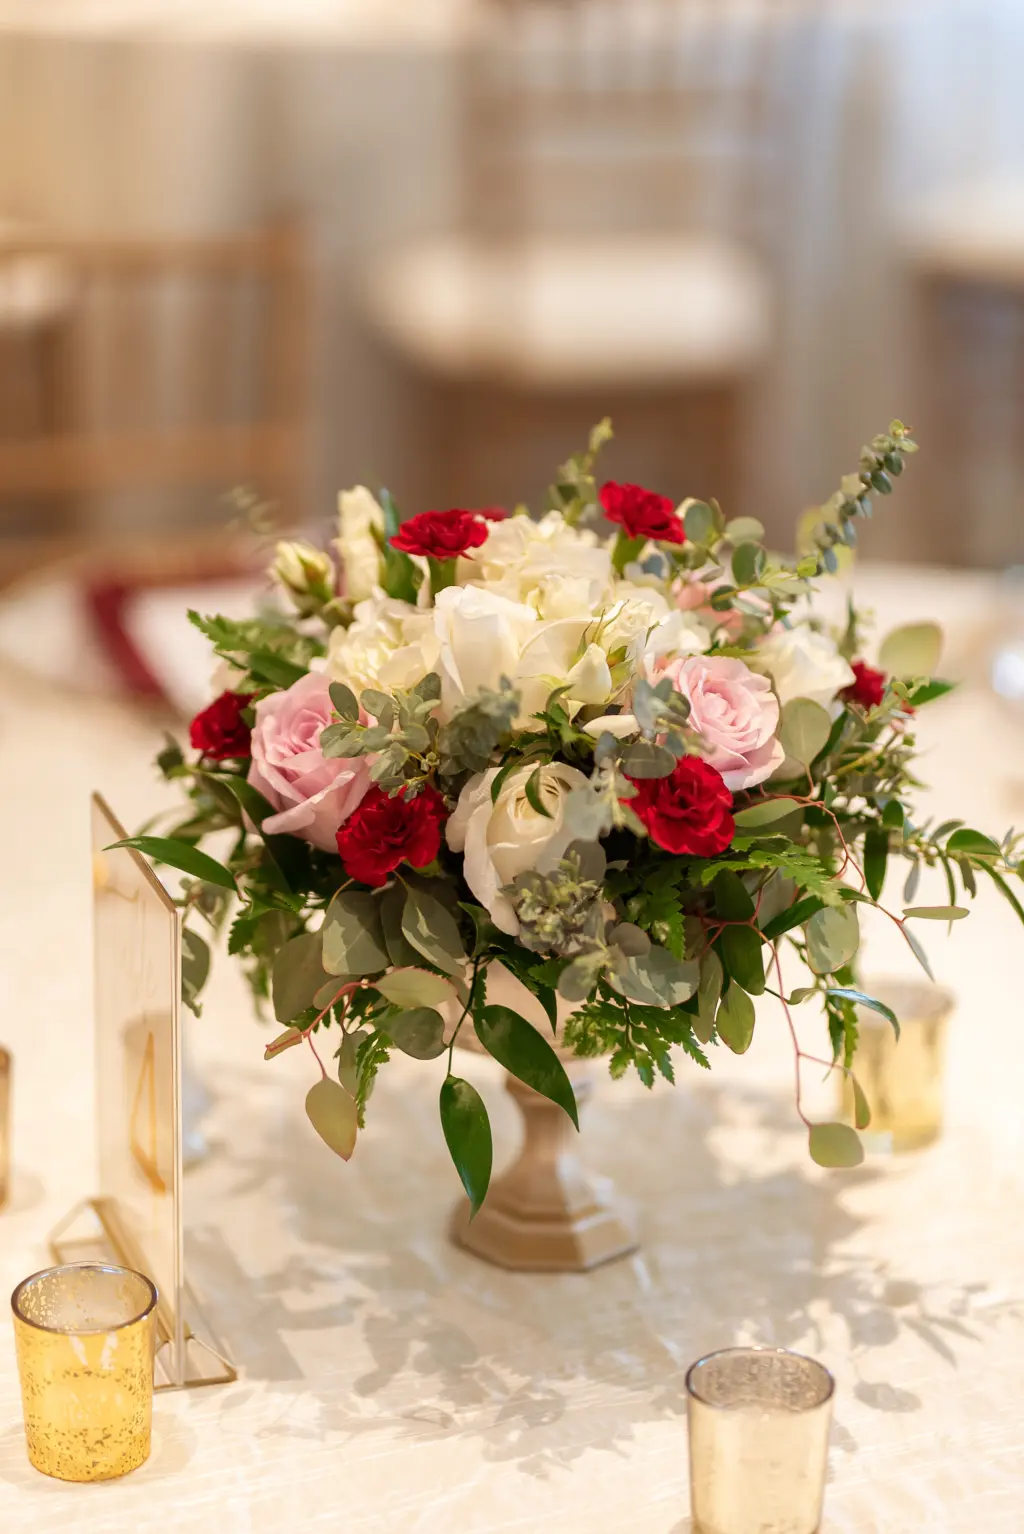 Elegant Fall Burgundy Carnations with Pink and White Roses and Greenery Wedding Reception Centerpiece Decor Inspiration